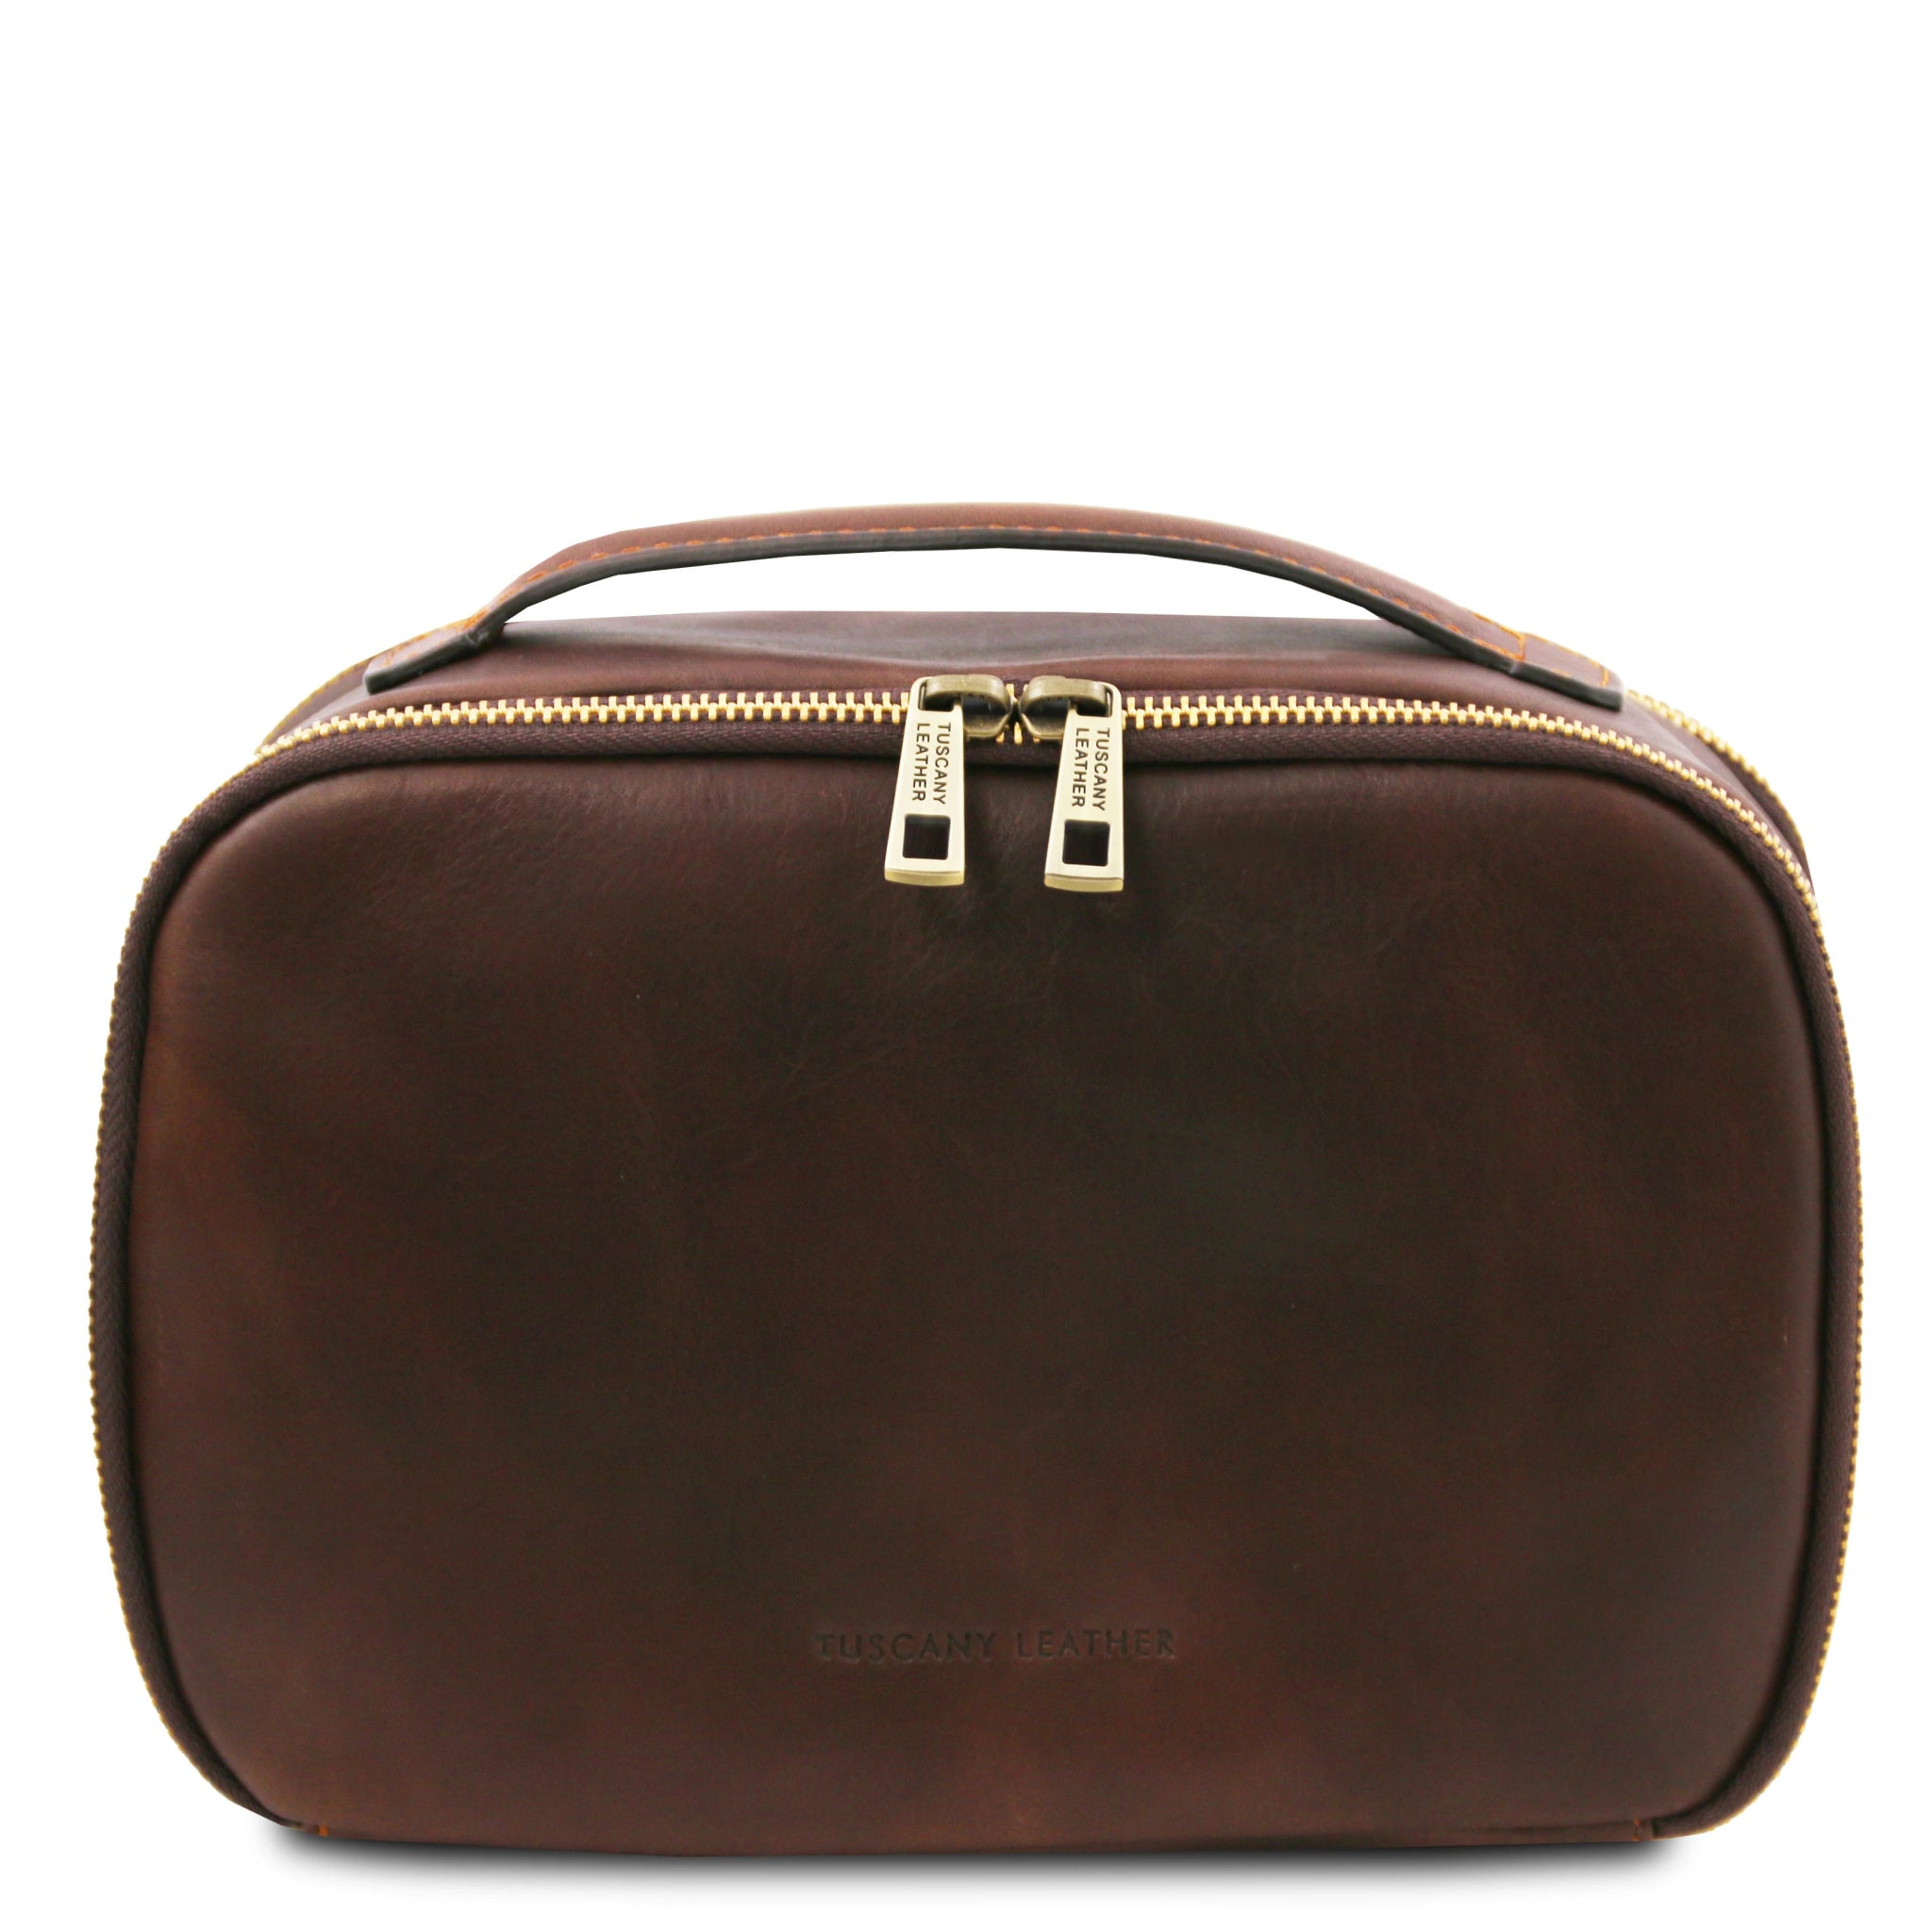 Marvin Italian Leather Toiletry Bag - L'Atelier Global